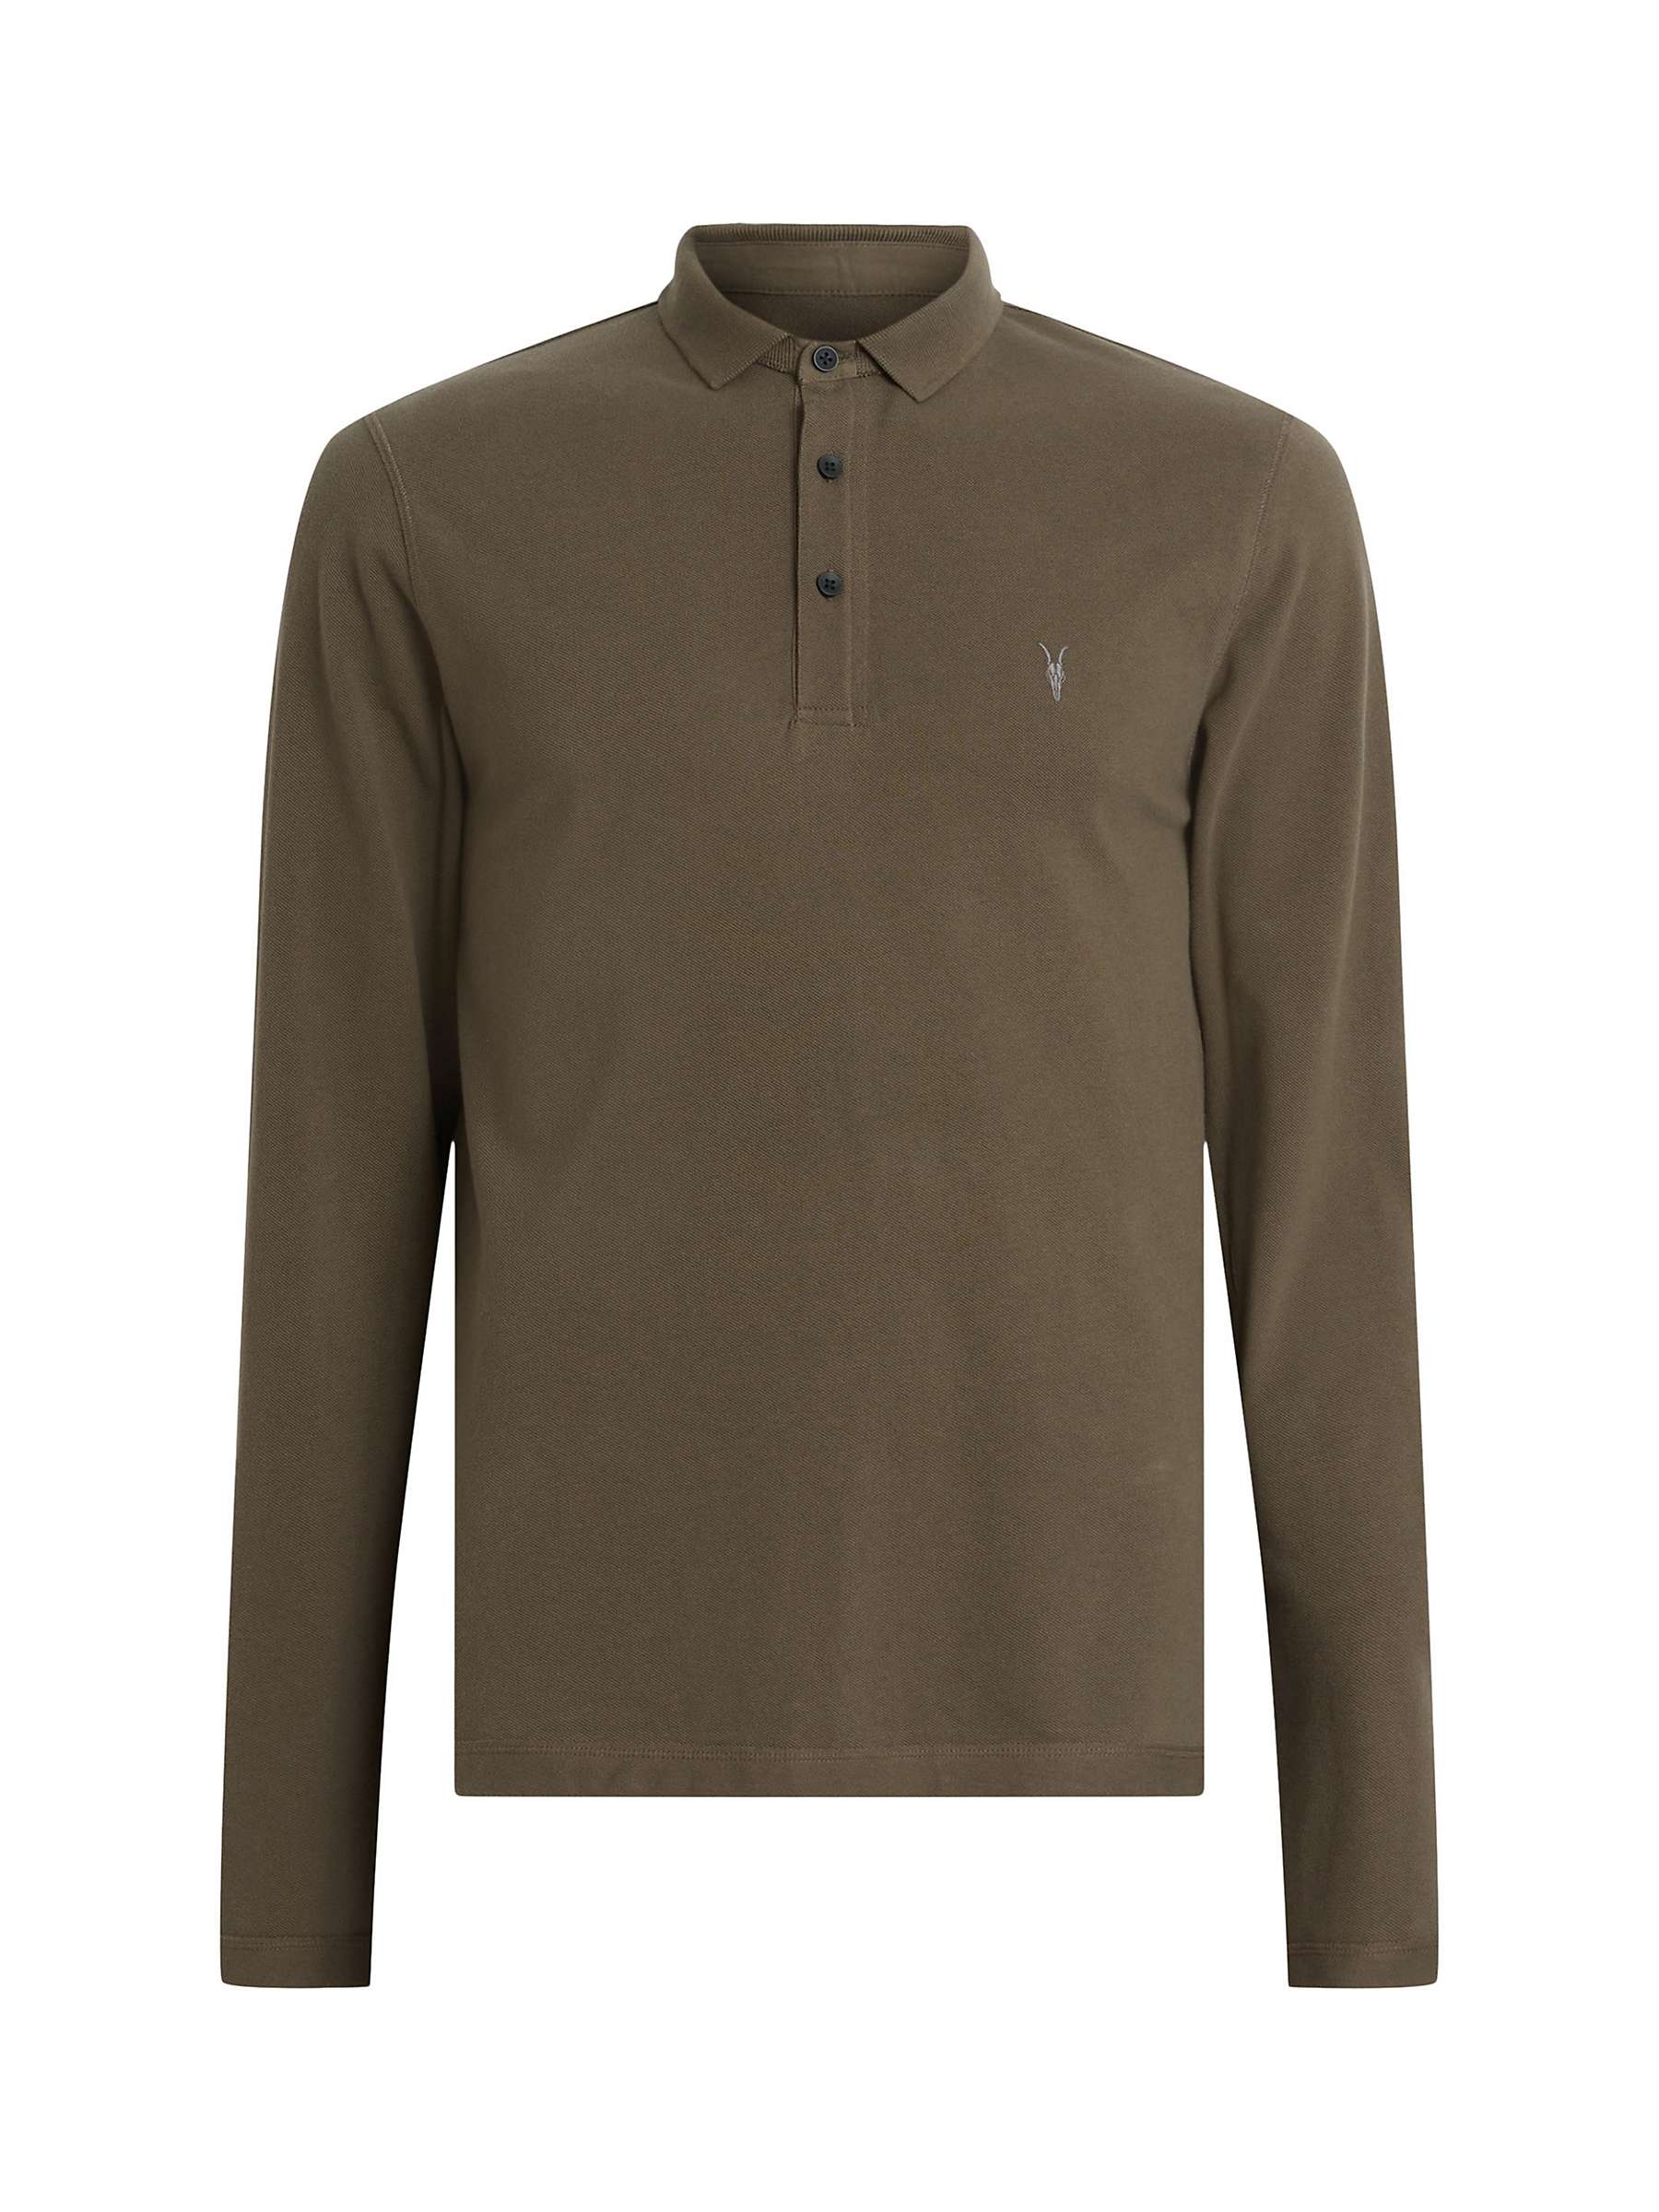 Buy AllSaints Reform Organic Cotton Long Sleeve Polo Top Online at johnlewis.com